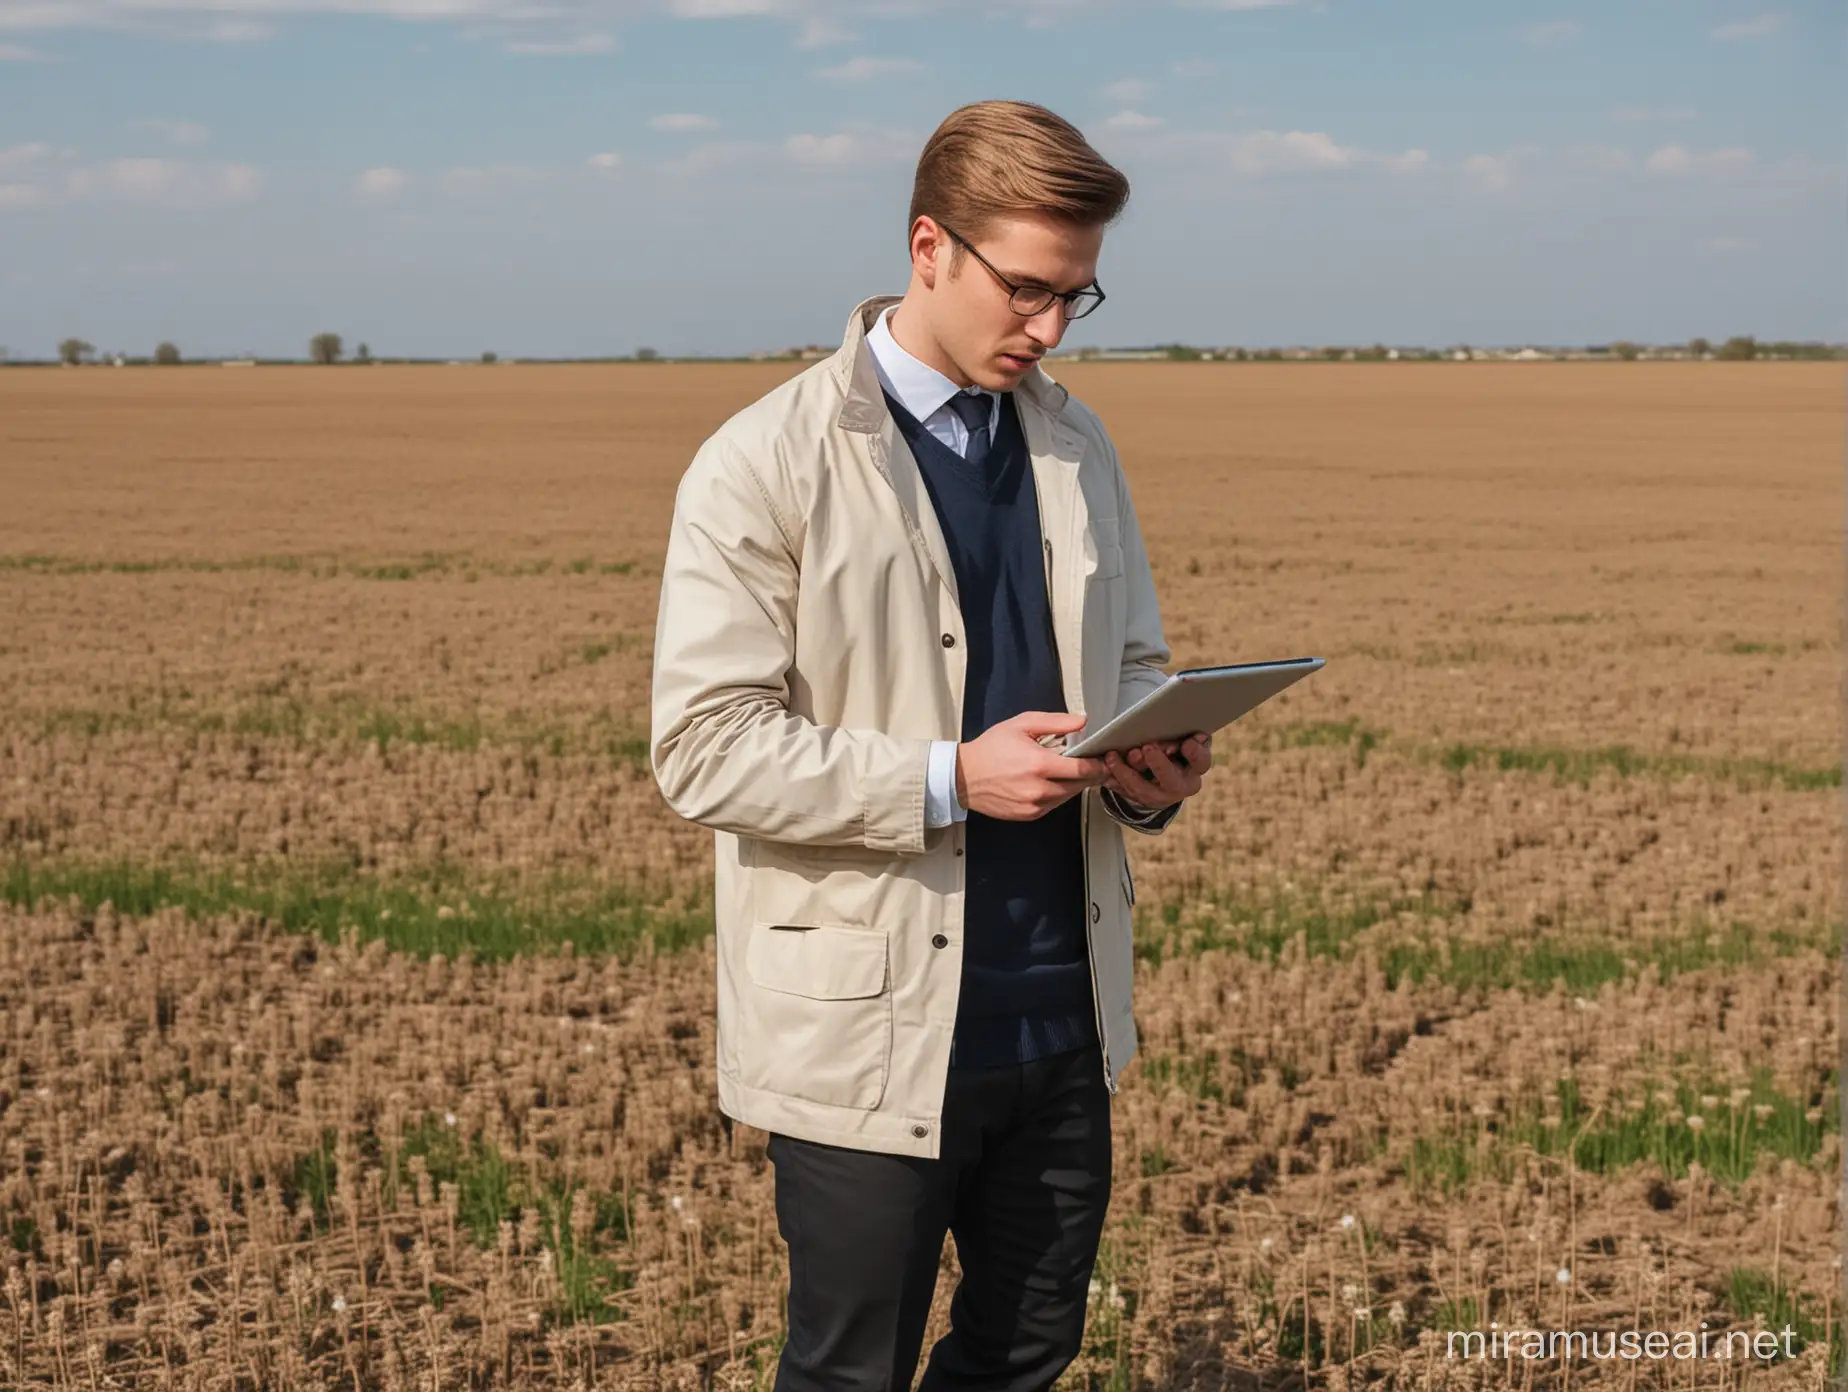 Young Business Consultant Evaluates Techniques with iPad in European Spring Field